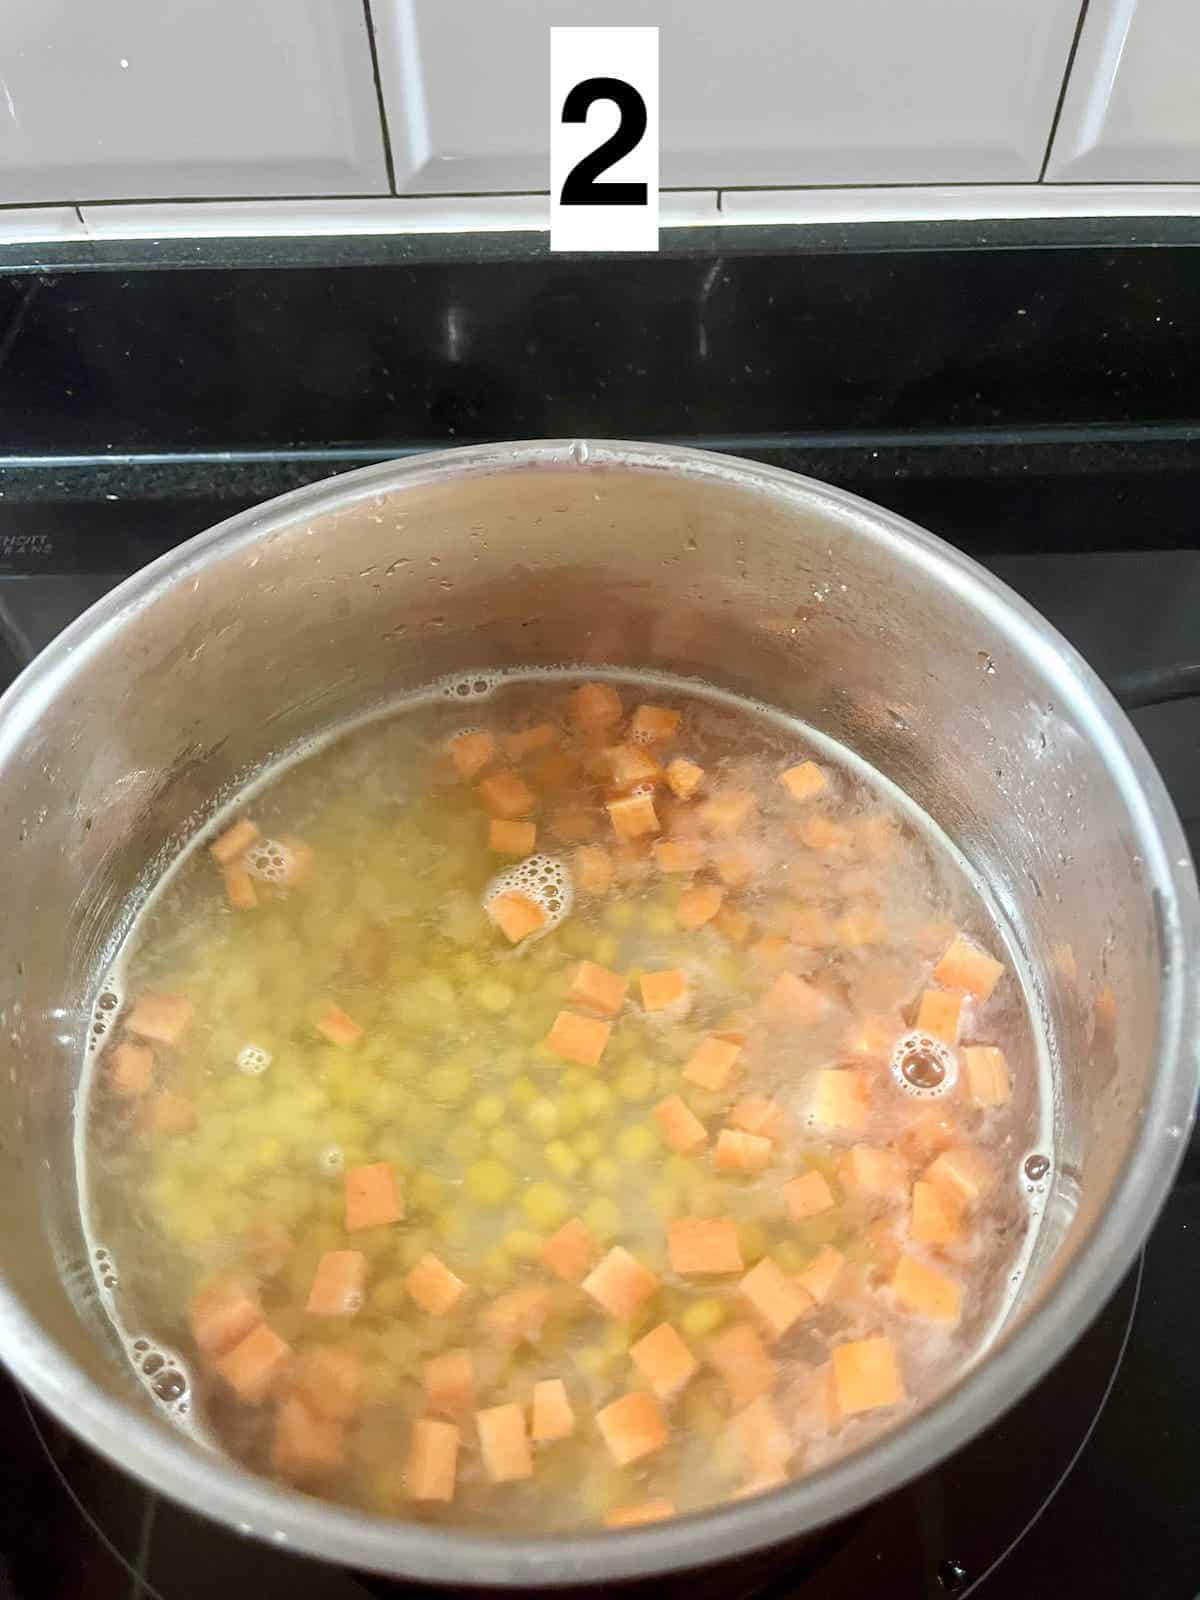 Bringing corn and carrots to the boil.